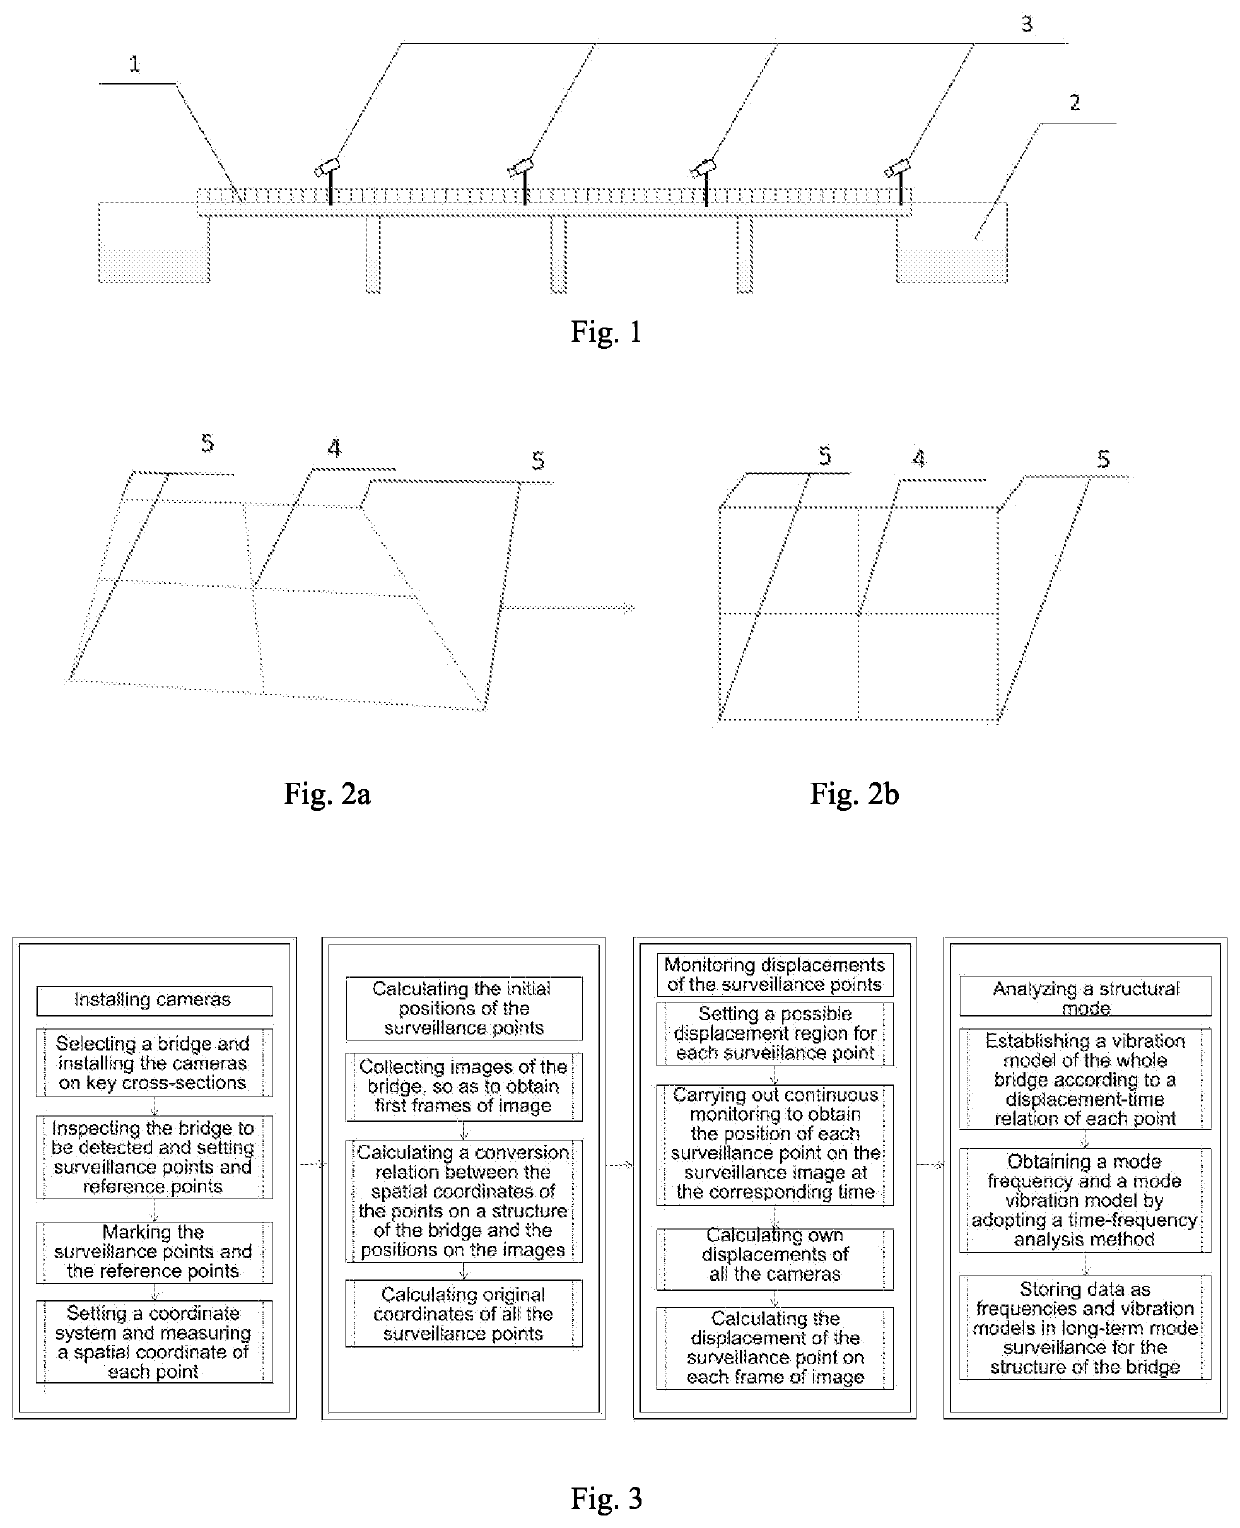 Method for modal analysis of bridge structures based on surveillance videos